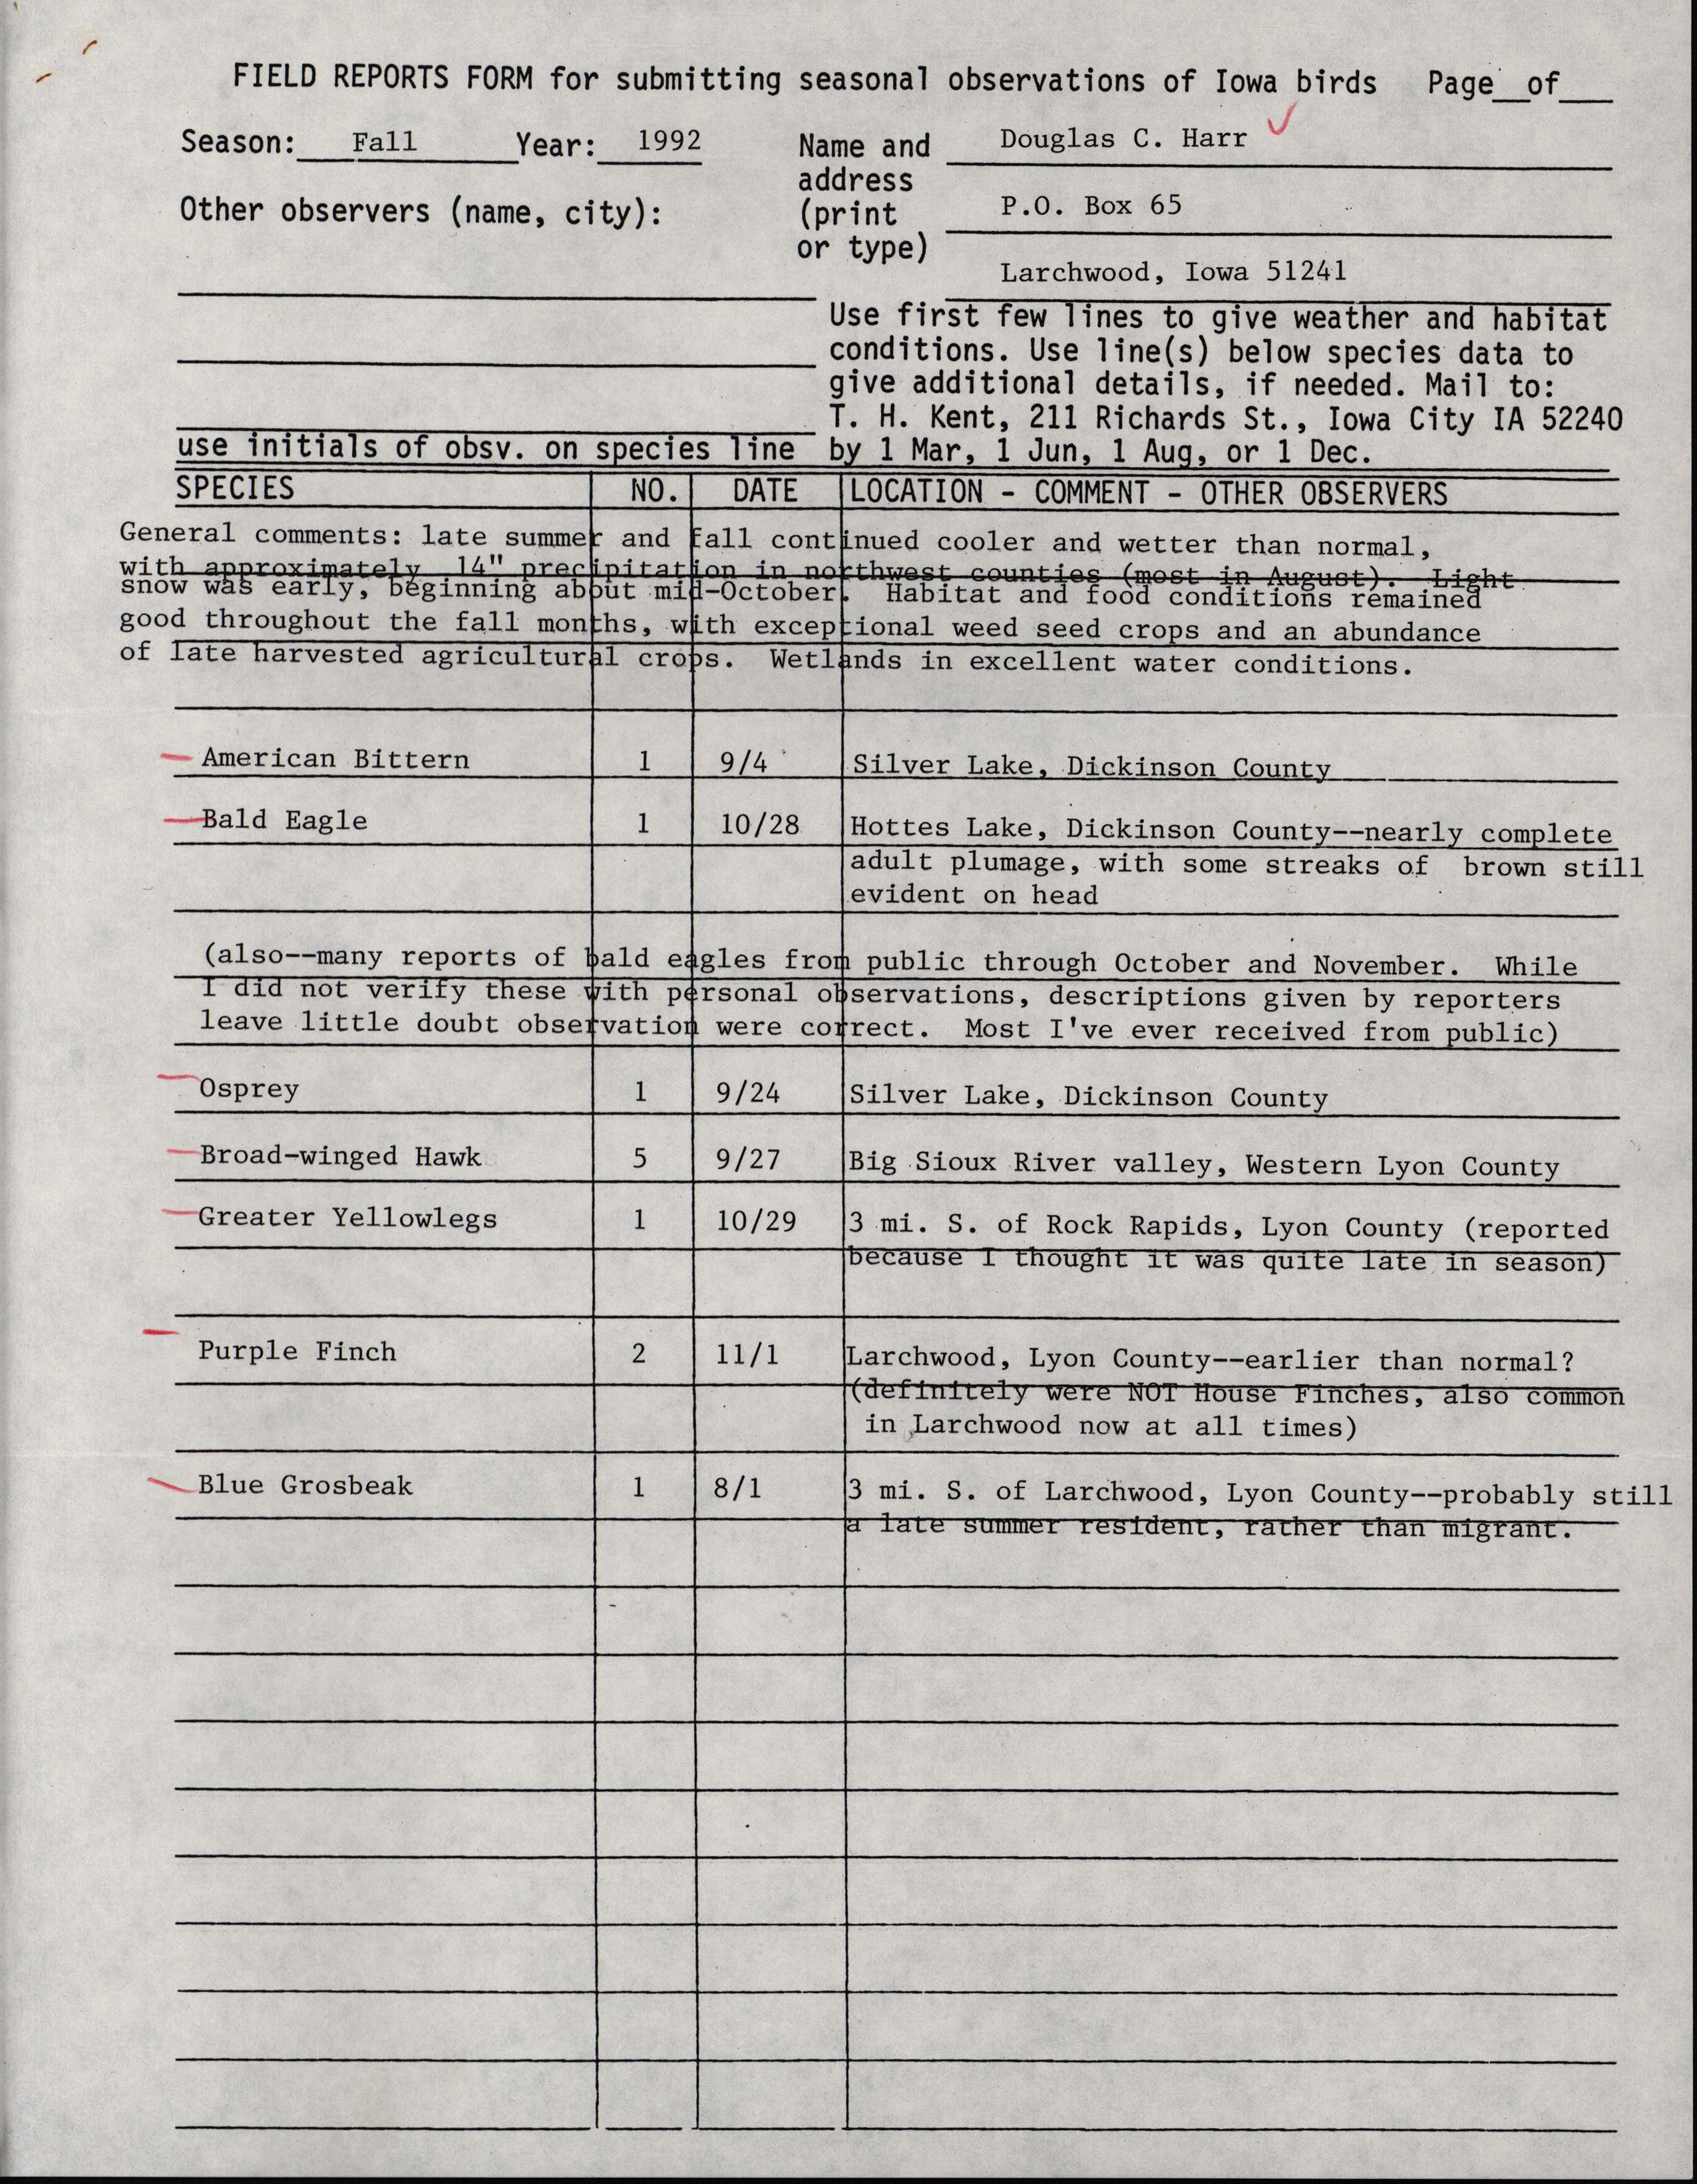 Field reports form for submitting seasonal observations of Iowa birds, Douglas C. Harr, fall 1992